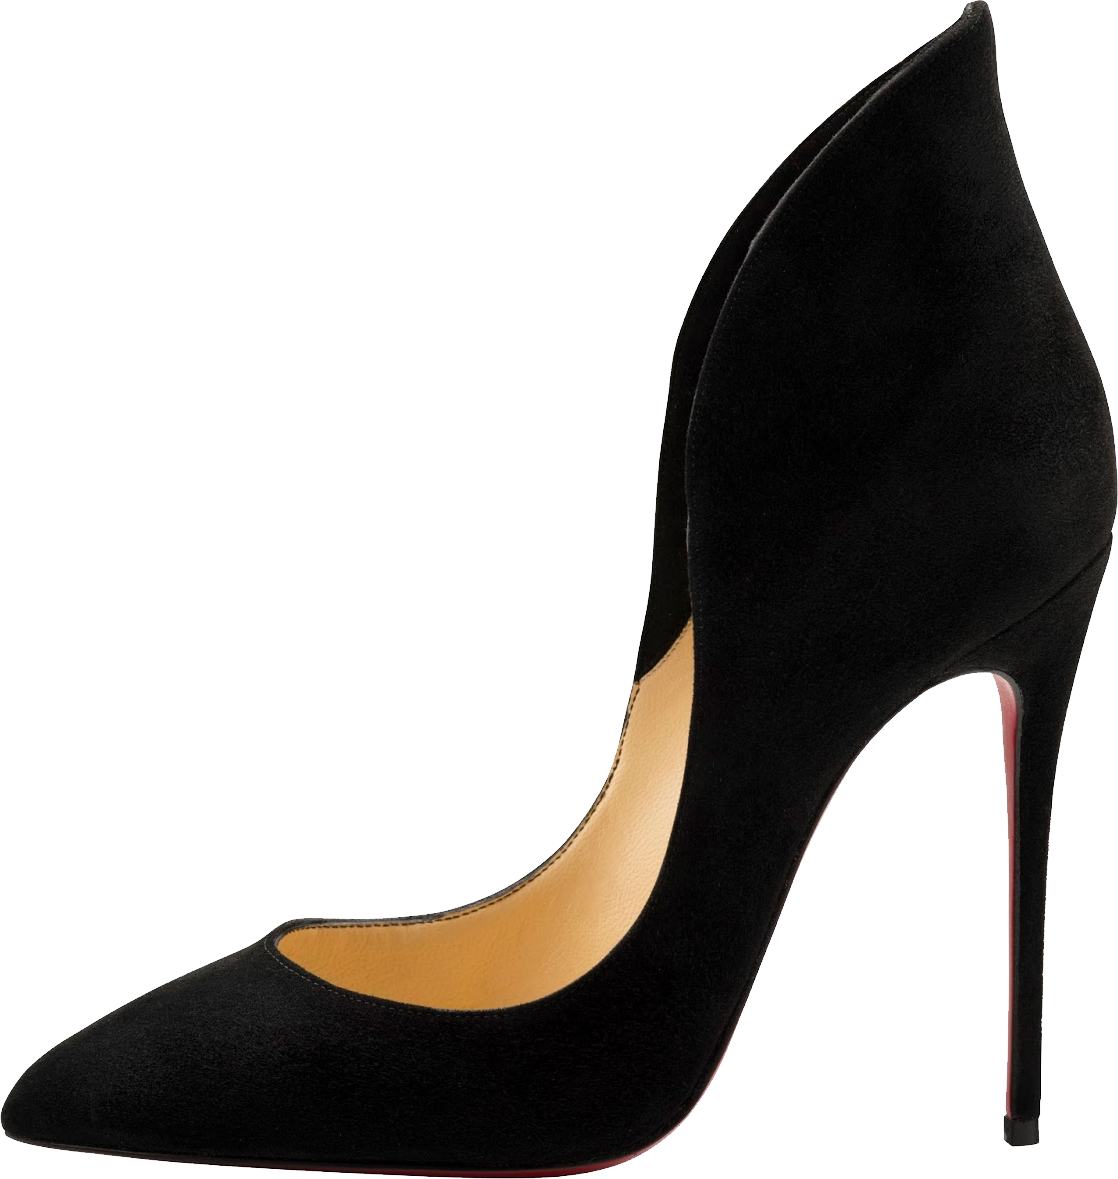 Download Black Louboutin Womens Png Image For Free